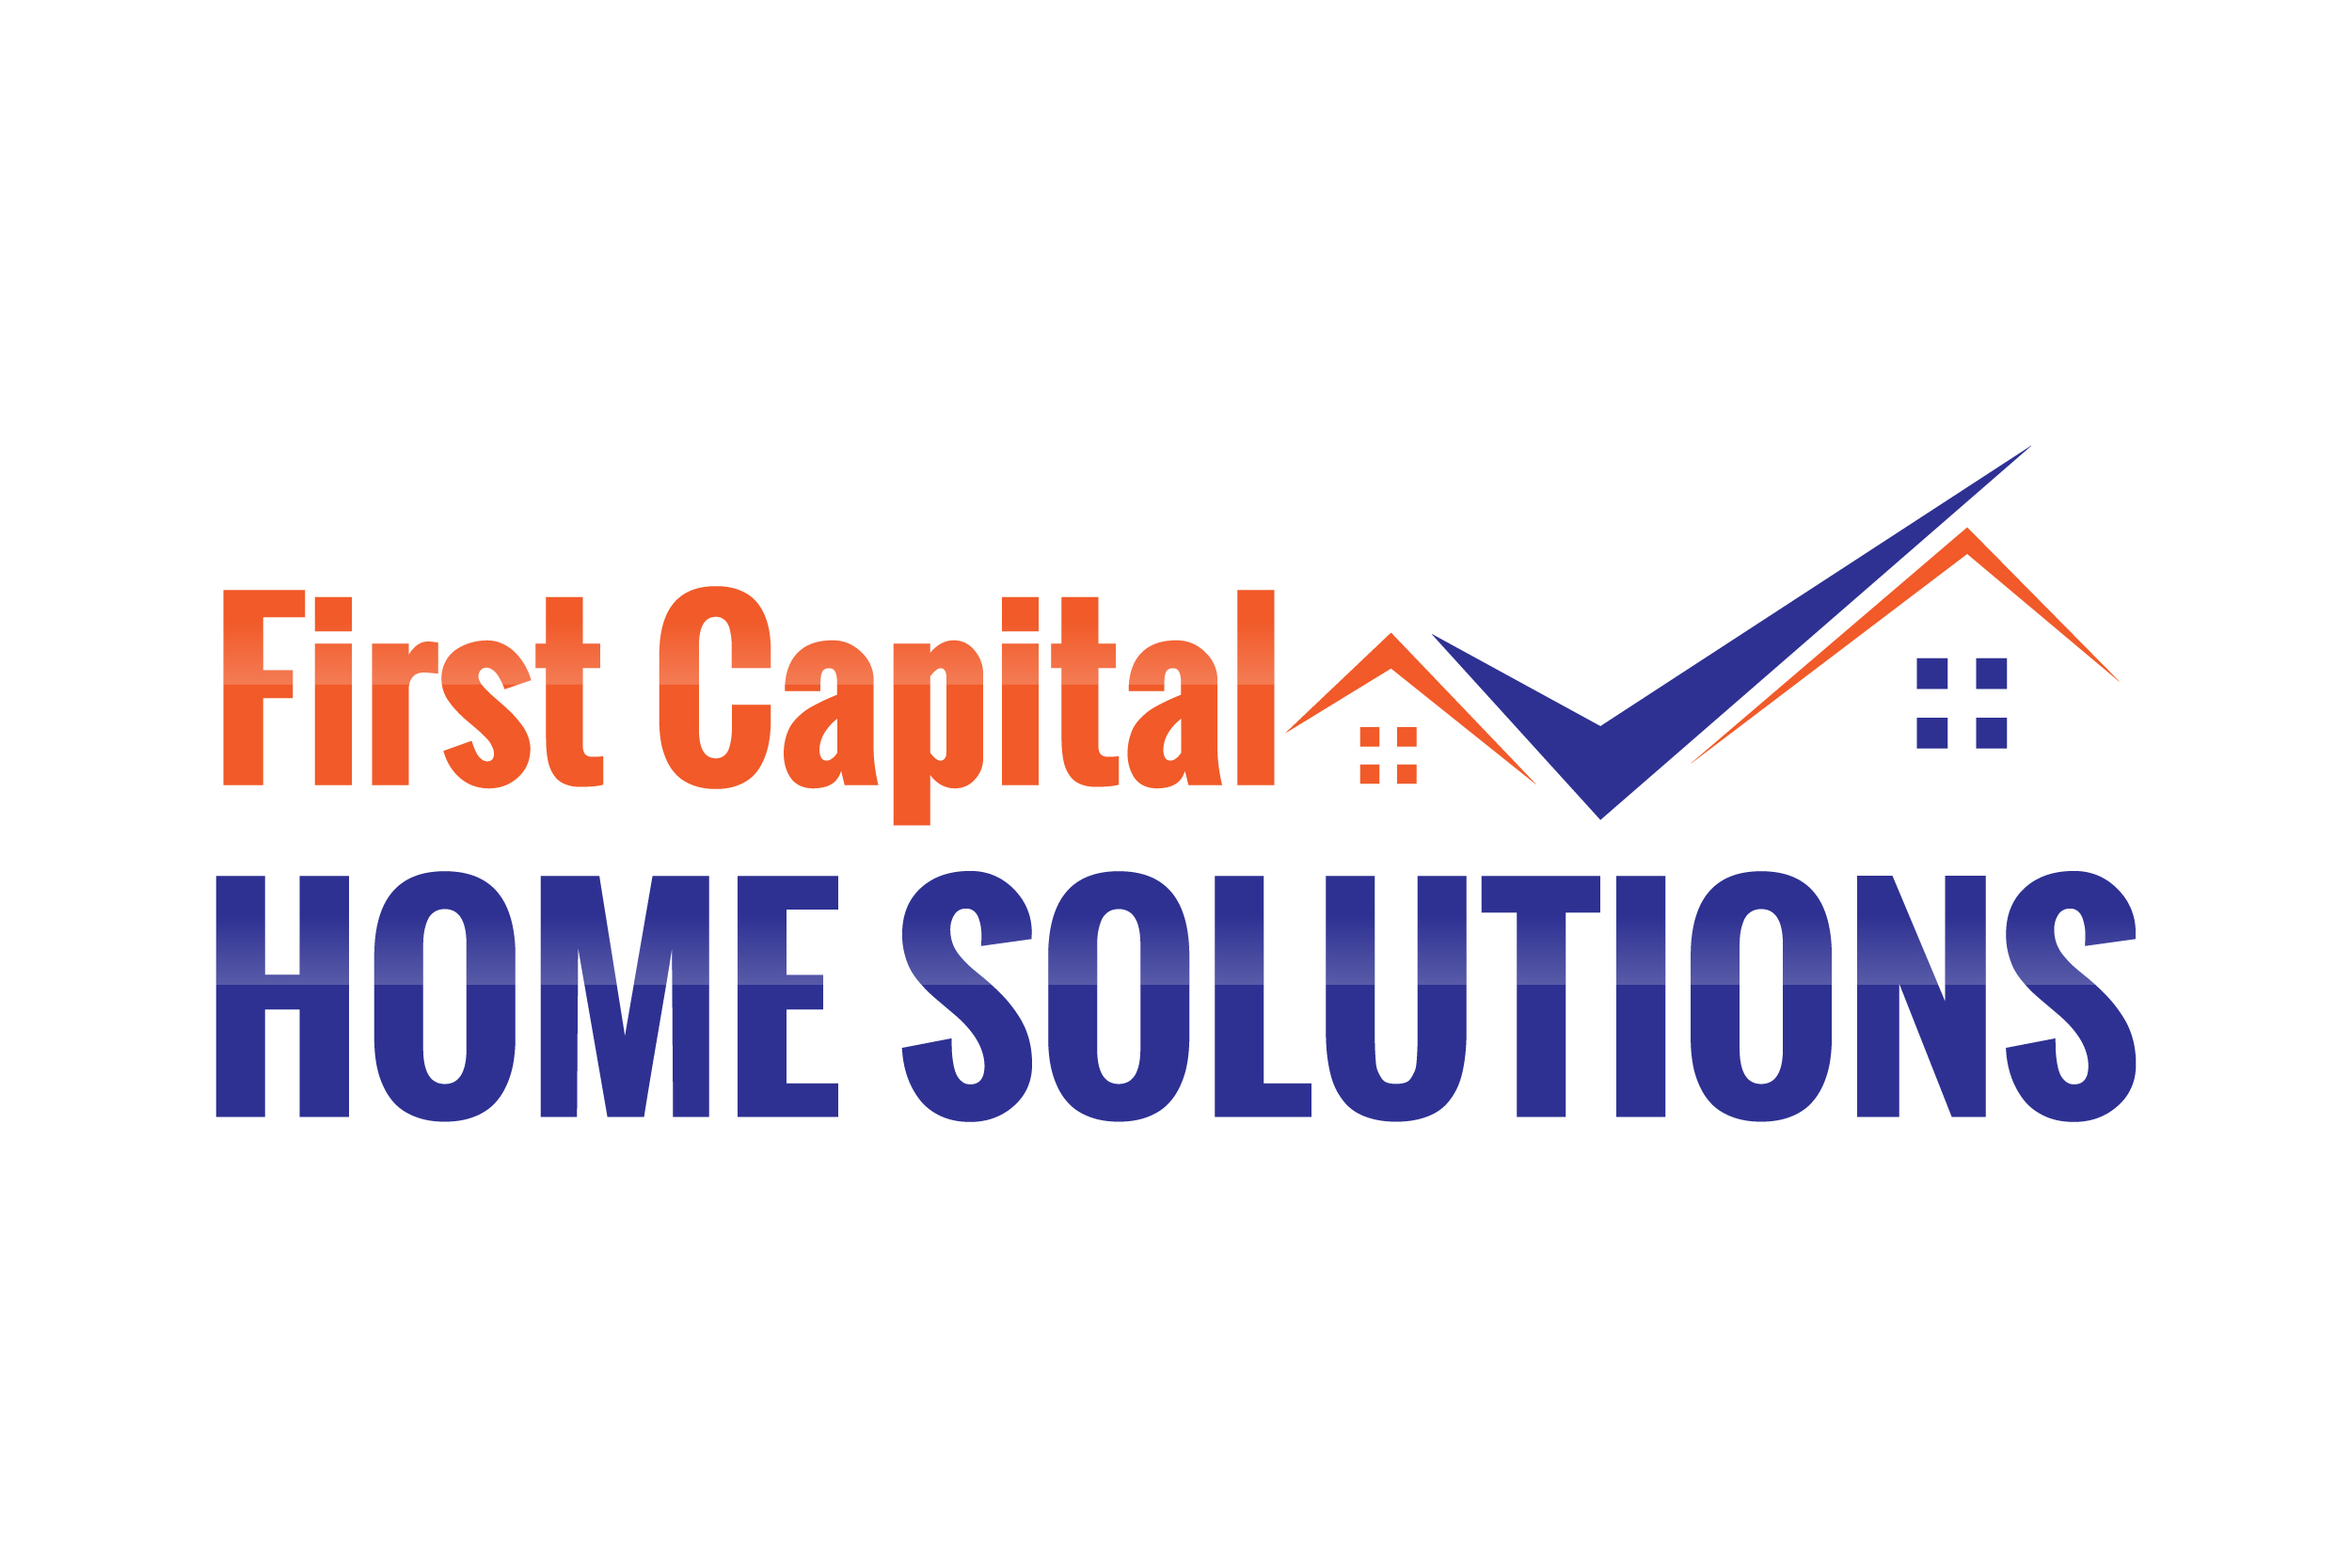 First Capital Home Solutions